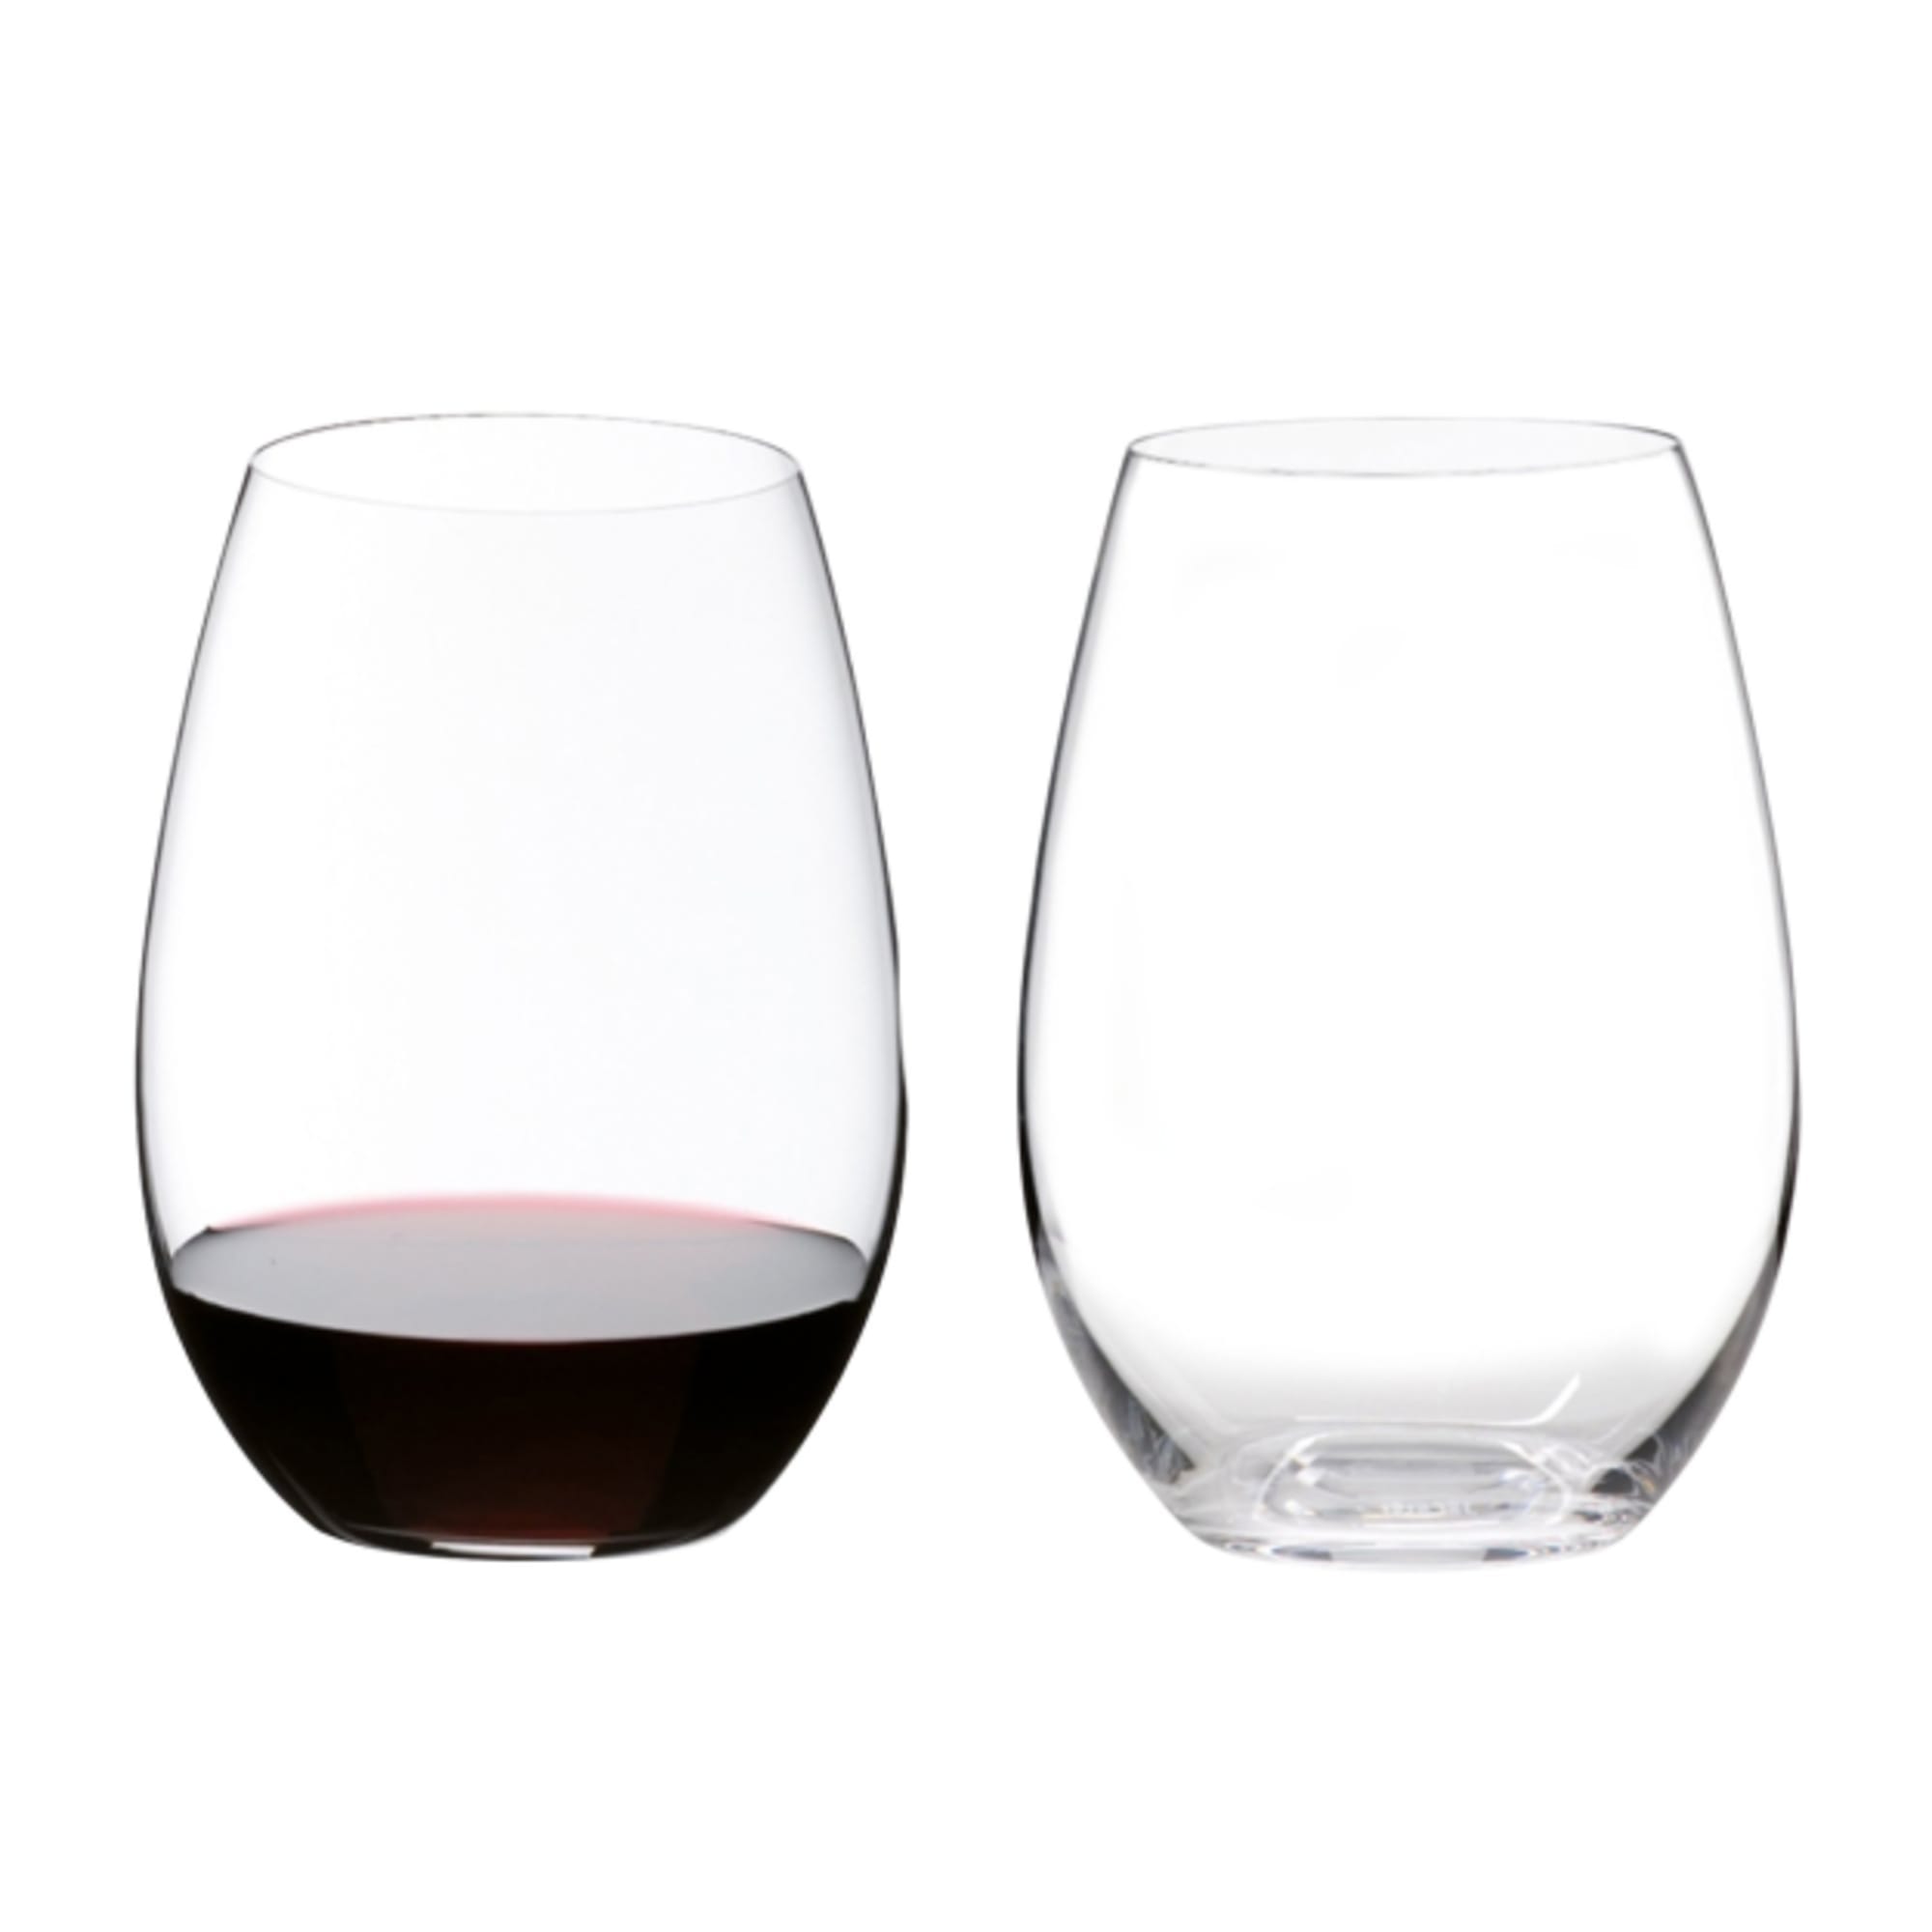 https://res.cloudinary.com/kitchenwarehouse/image/upload/c_fill,g_face,w_625/f_auto/t_PDP_2000x2000/Supplier%20Images%20/2000px/Riedel-O-Series-Shiraz-Wine-Glass-620ml-Set-of-2_1_2000px.jpg?imagetype=pdp_gallery